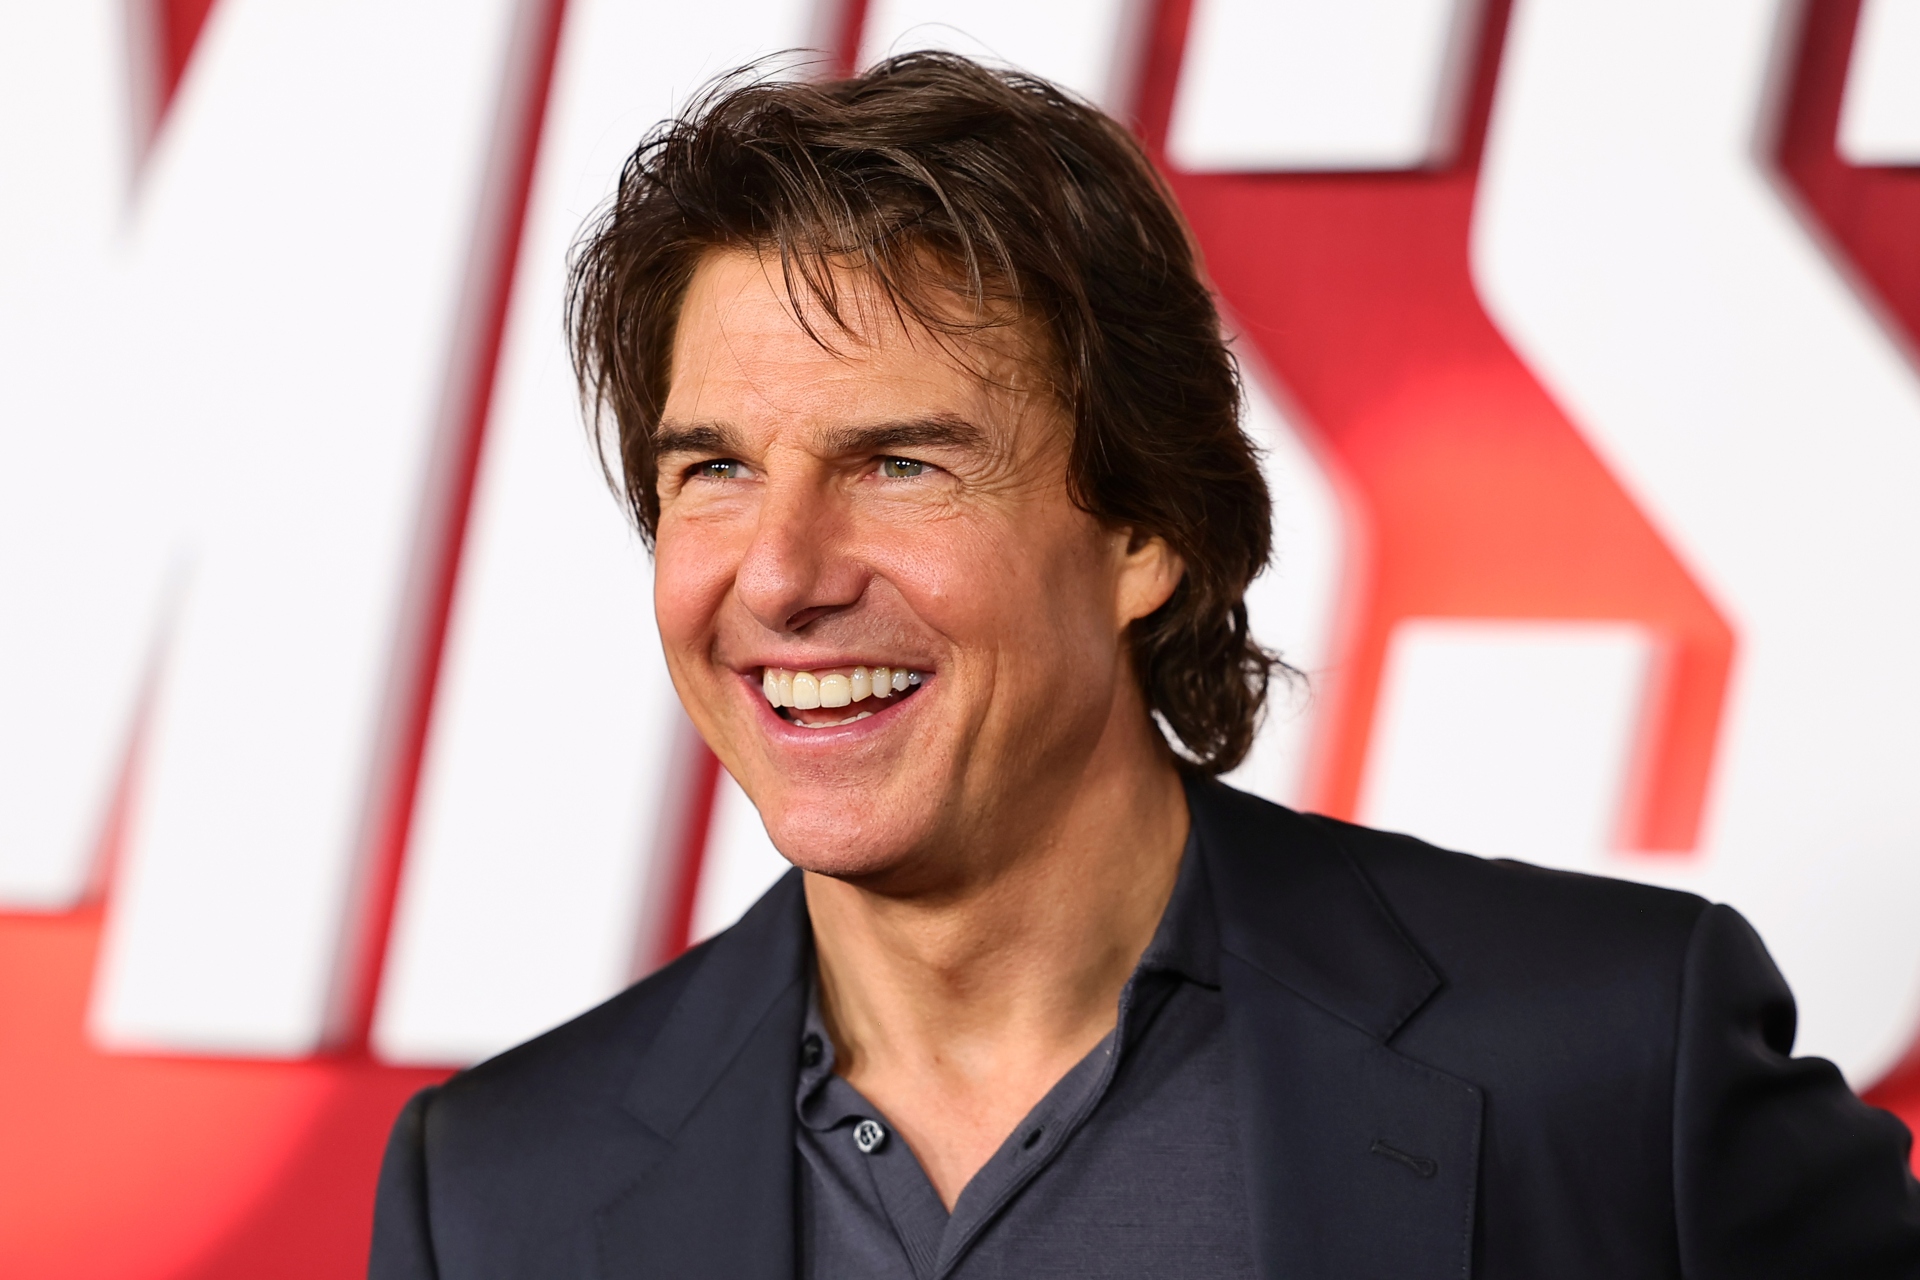 Tom Cruise (Actor) - July 3, 1962